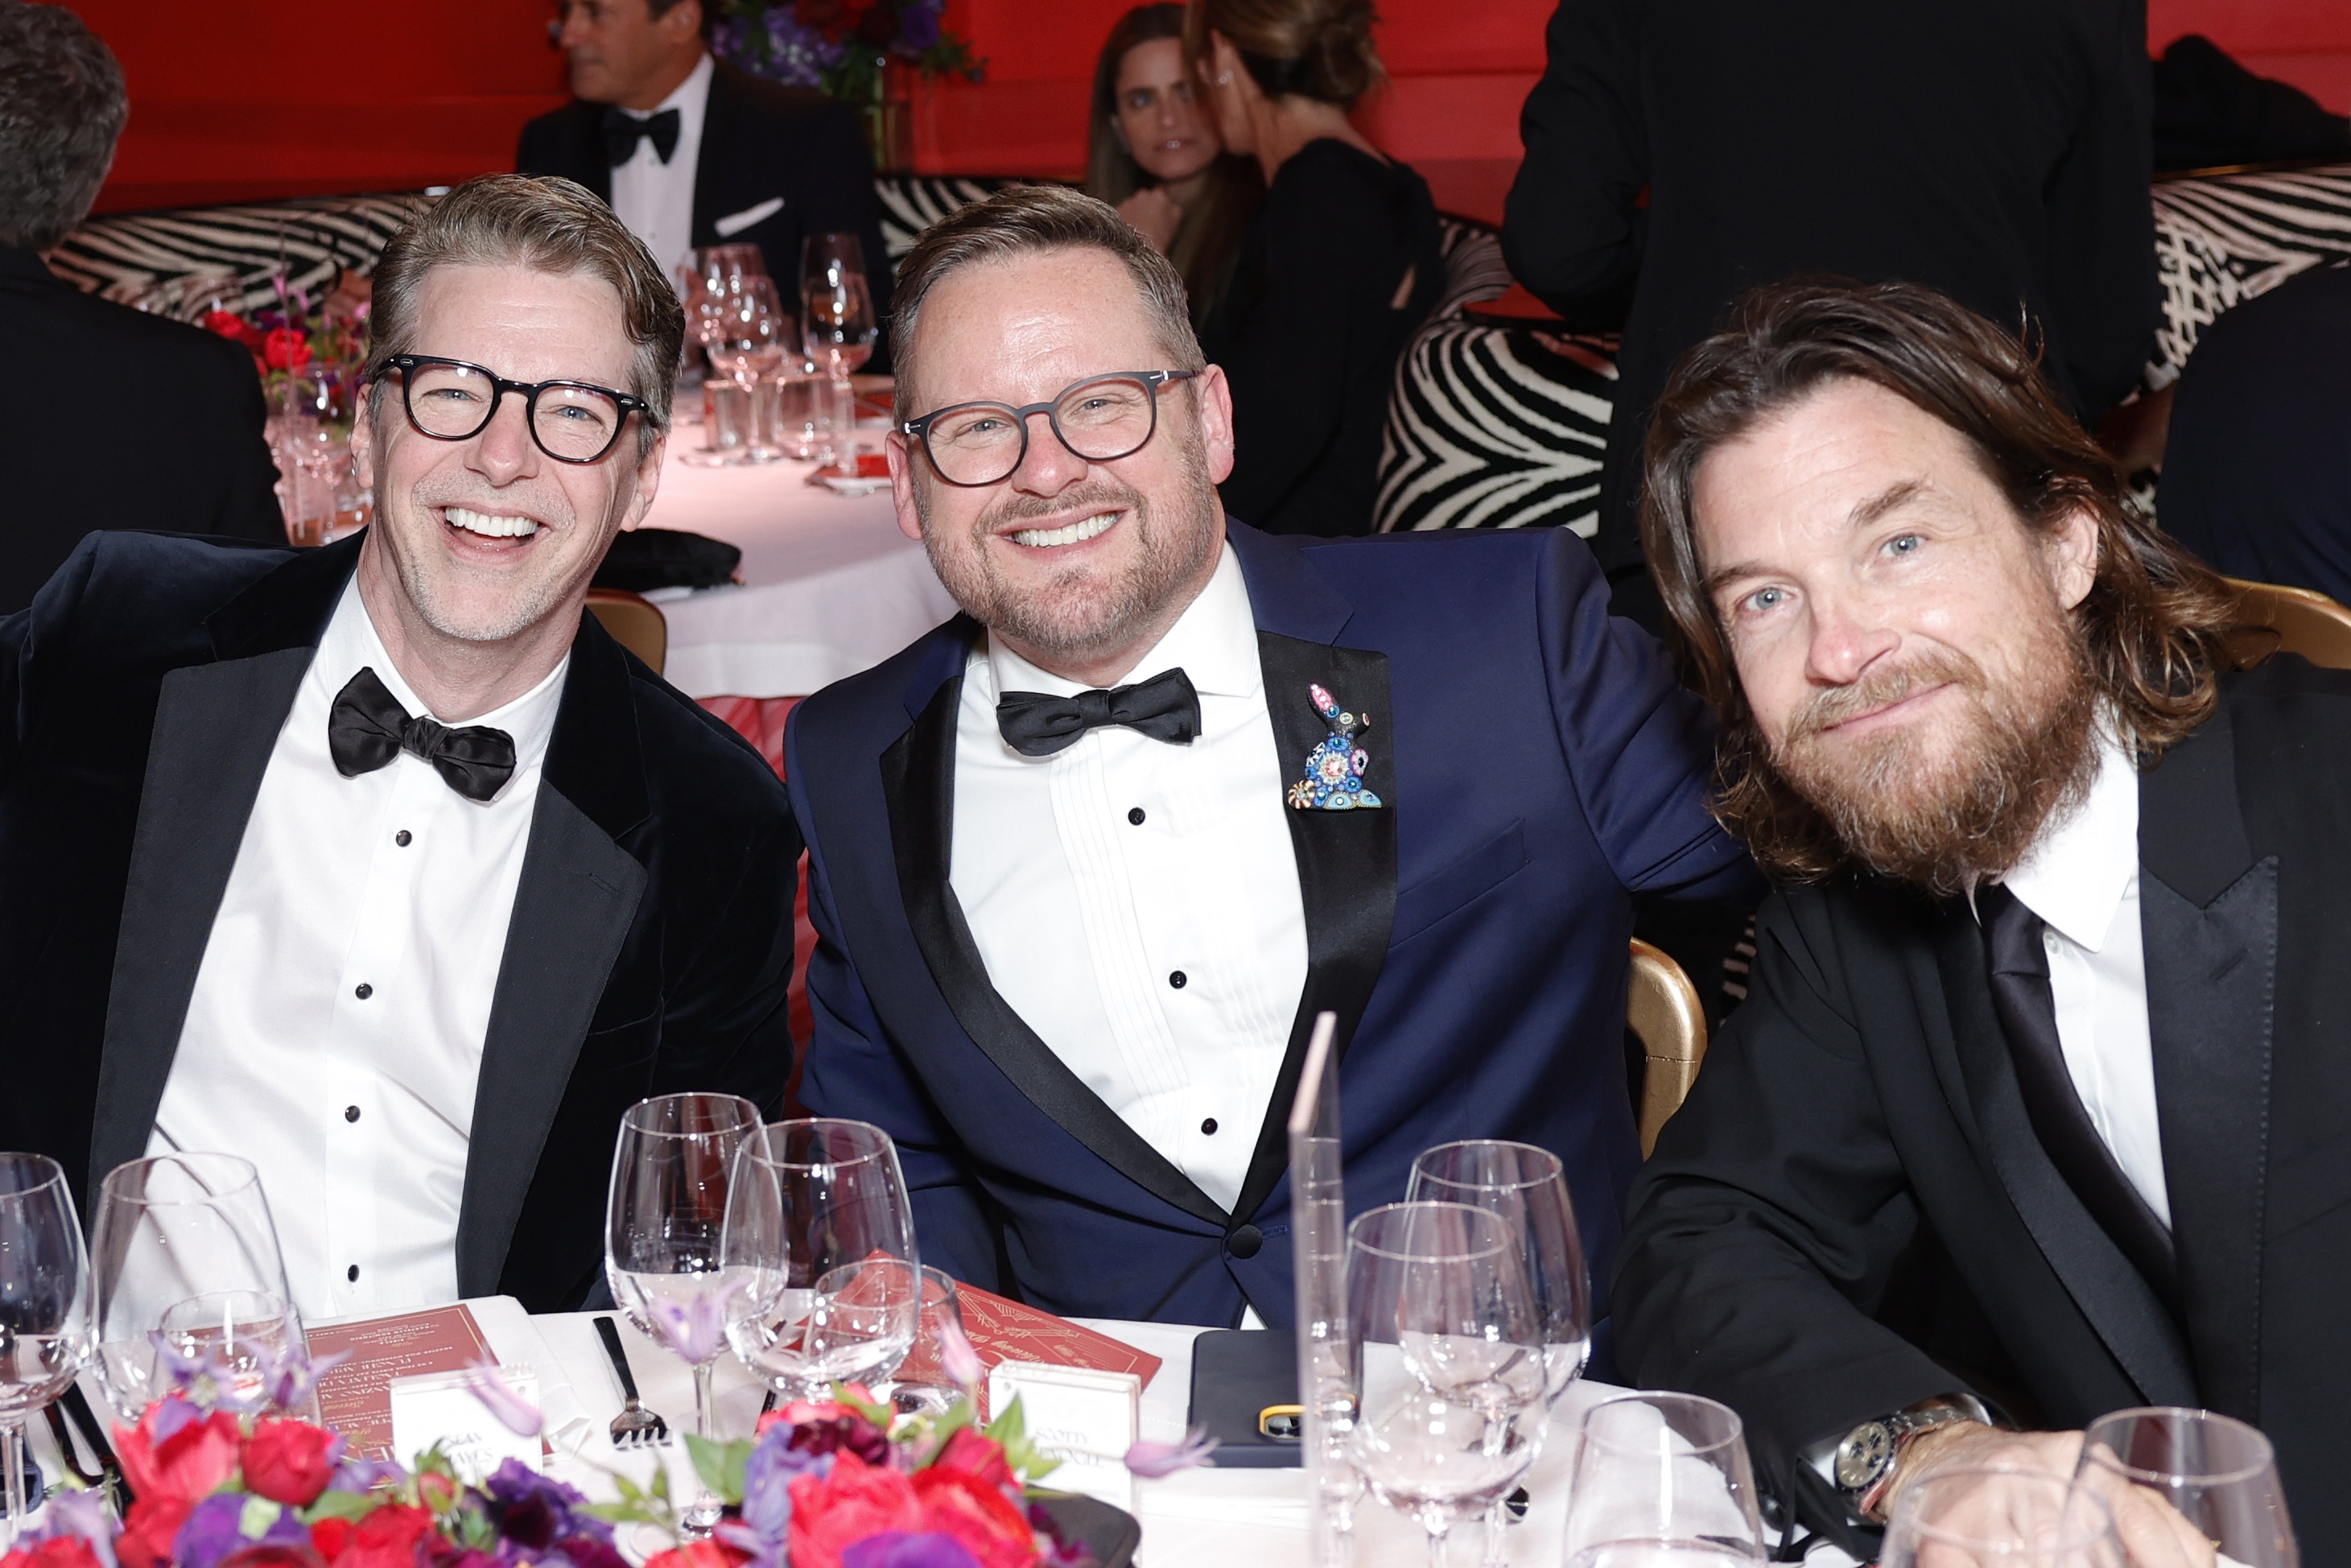 Jason Bateman, Sean Hayes, and another man in tuxedos seated at a table, smiling